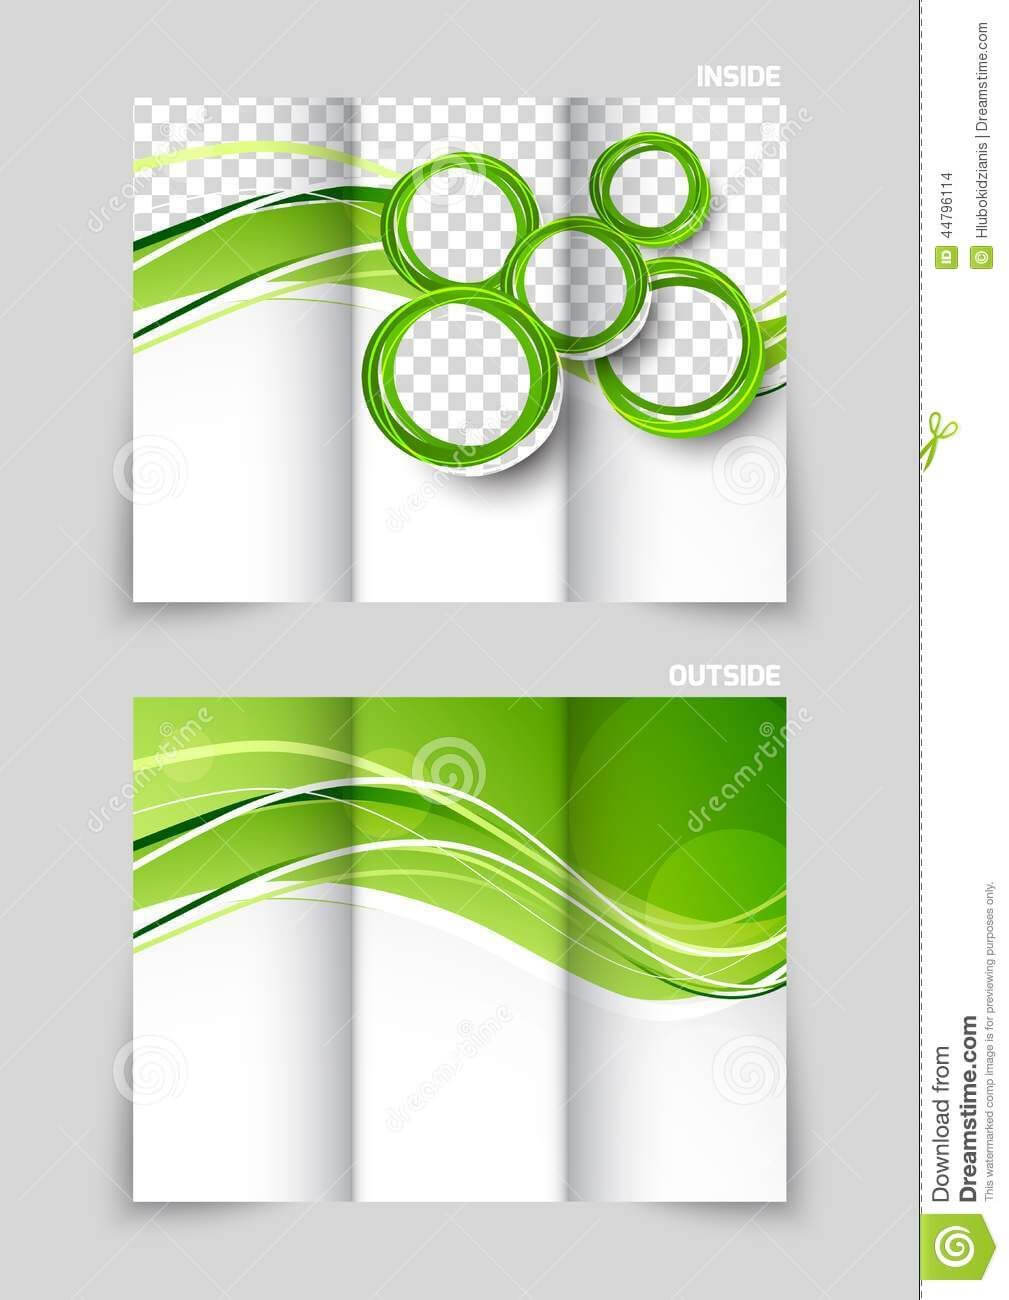 Tri Fold Brochure Template Design – Download From Over 27 With Free Illustrator Brochure Templates Download